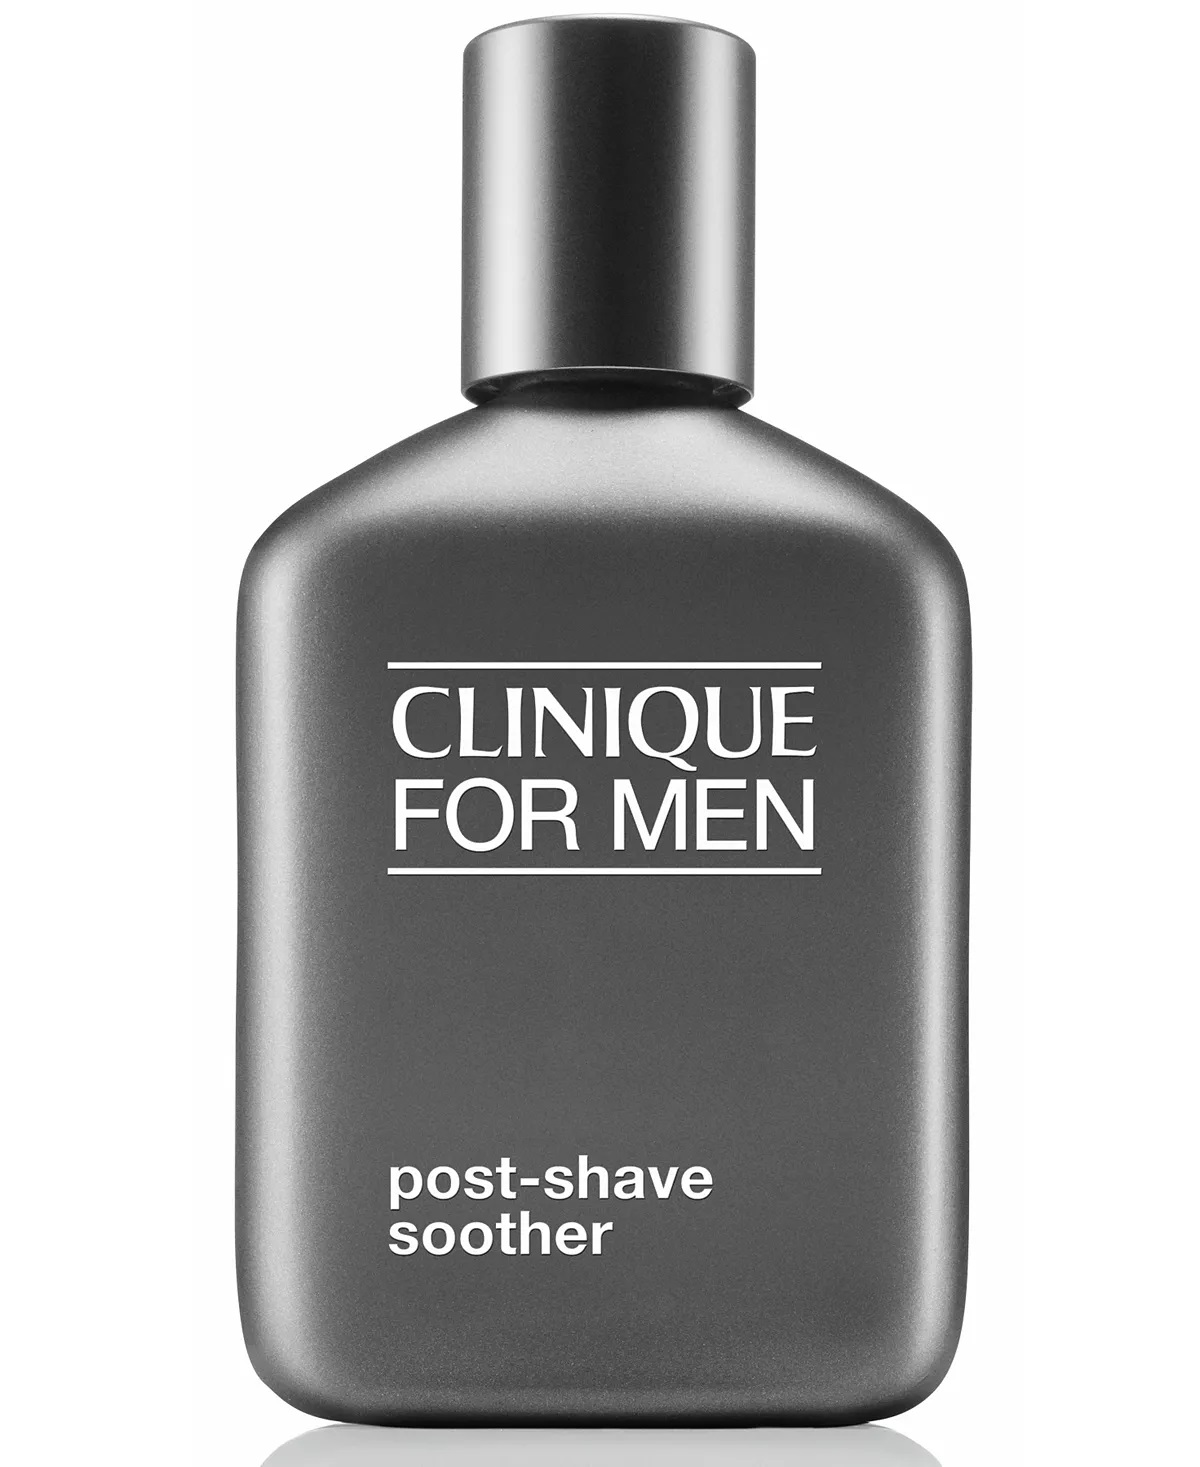 CLINIQUE For Men Post-Shave Soother, 2.5 fl oz